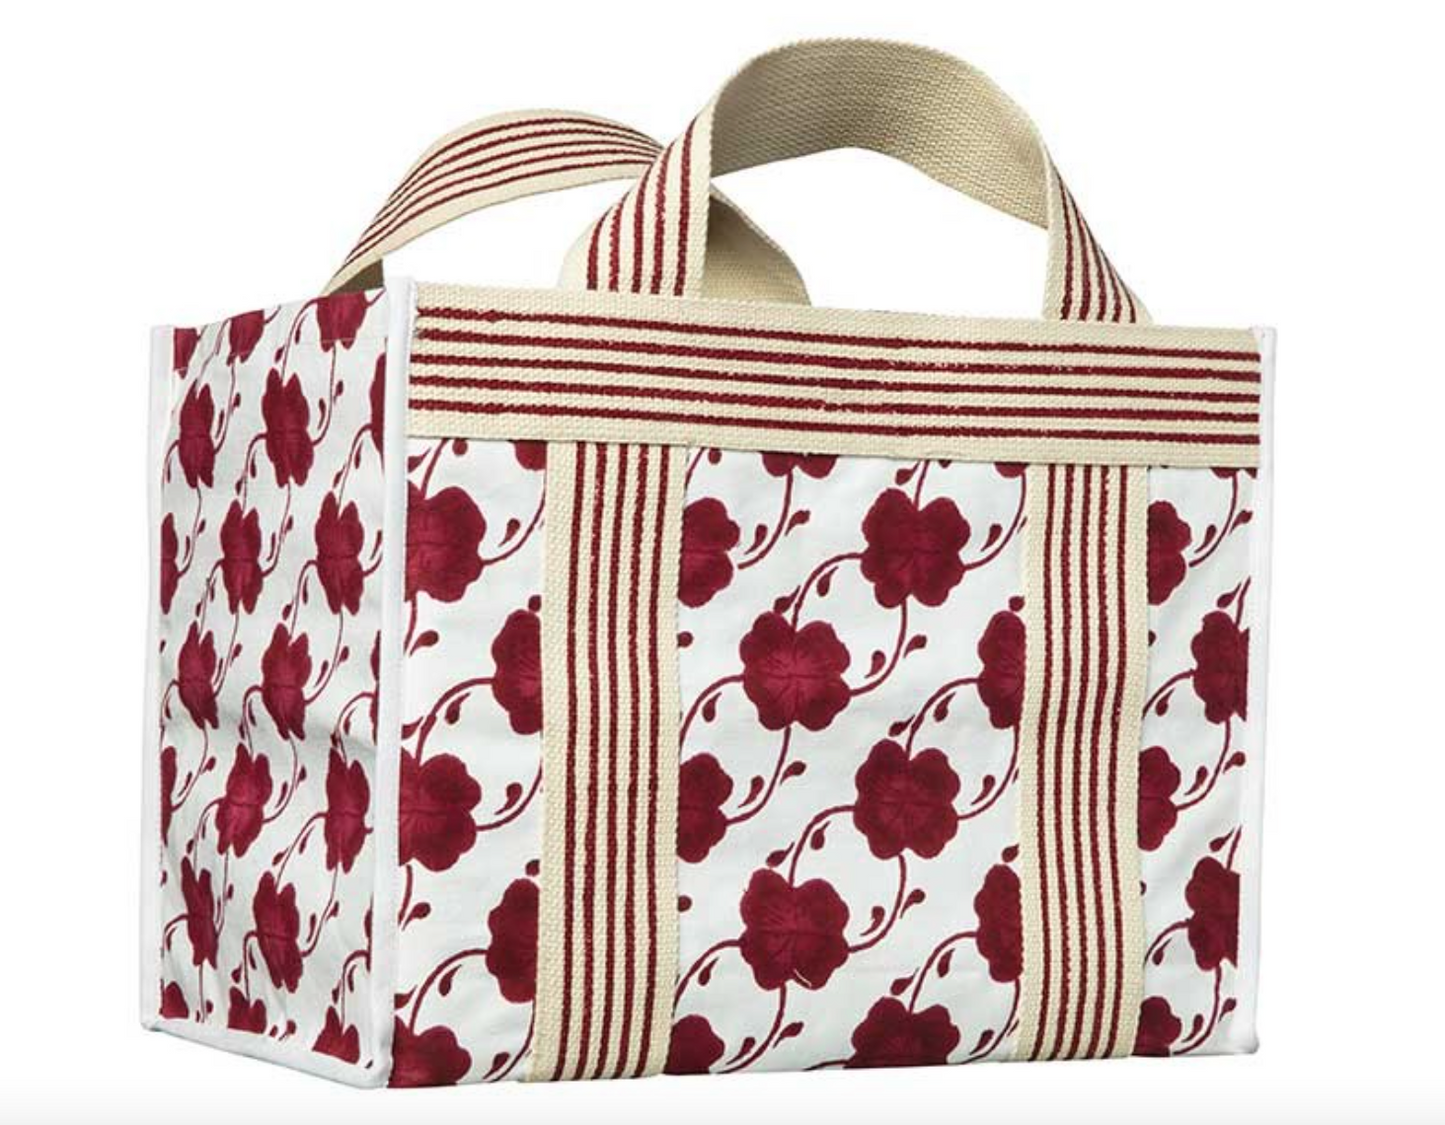 Best of Luck Tote Bag, Red